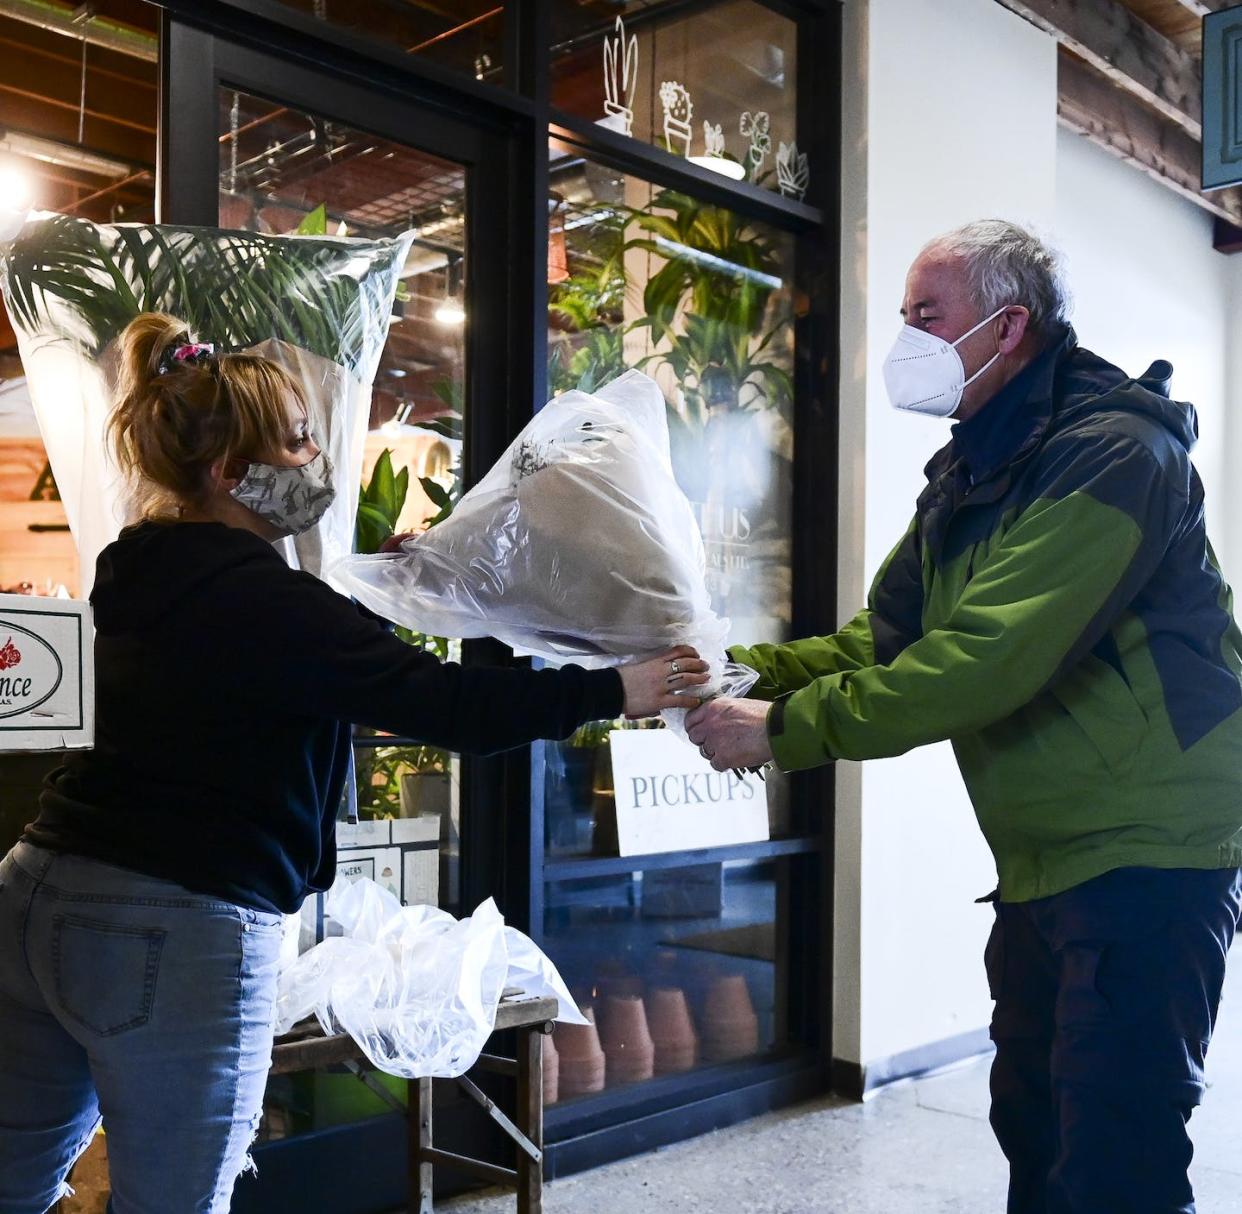 A florist hands a curbside order to a customer during the Valentine's Day rush in Almonte, Ont., in February 2021. THE CANADIAN PRESS/Sean Kilpatrick